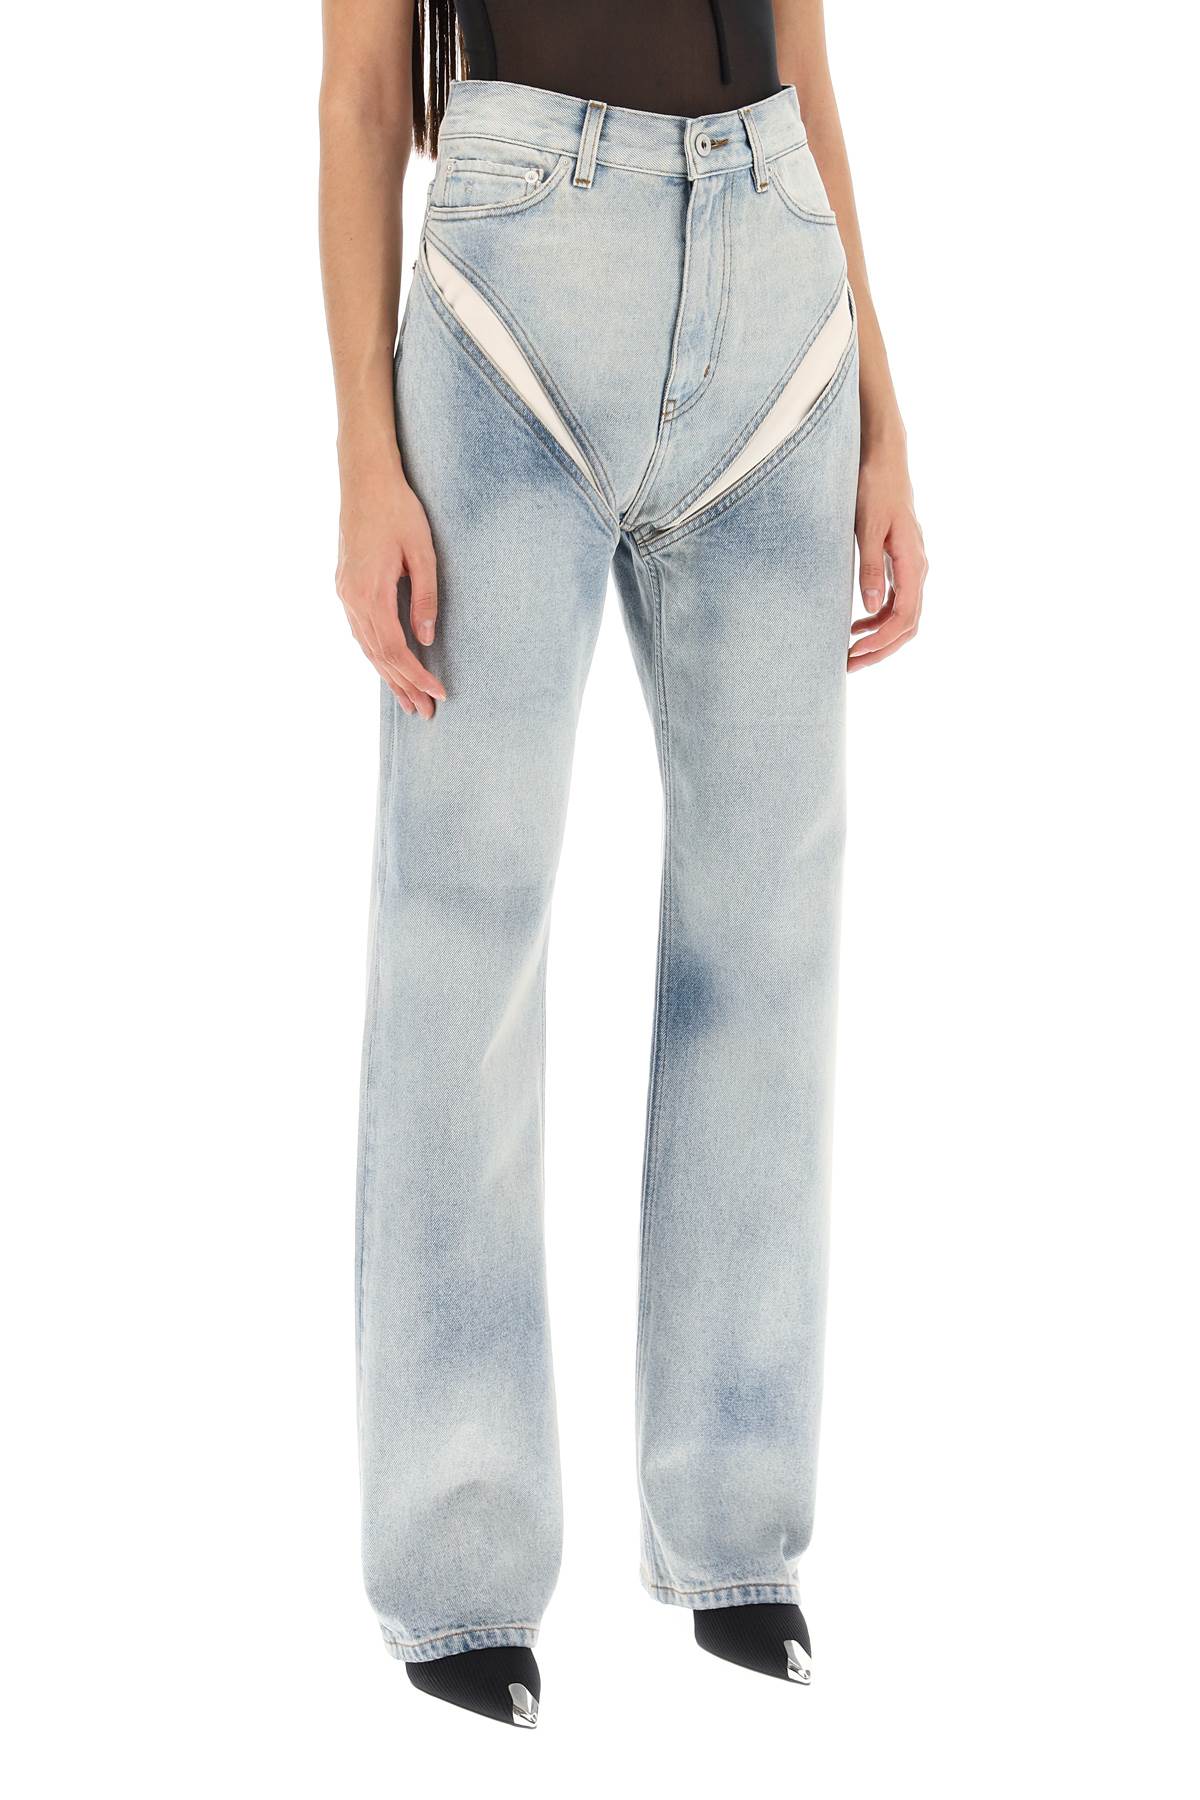 Y/PROJECT CUT-OUT BAGGY JEANS